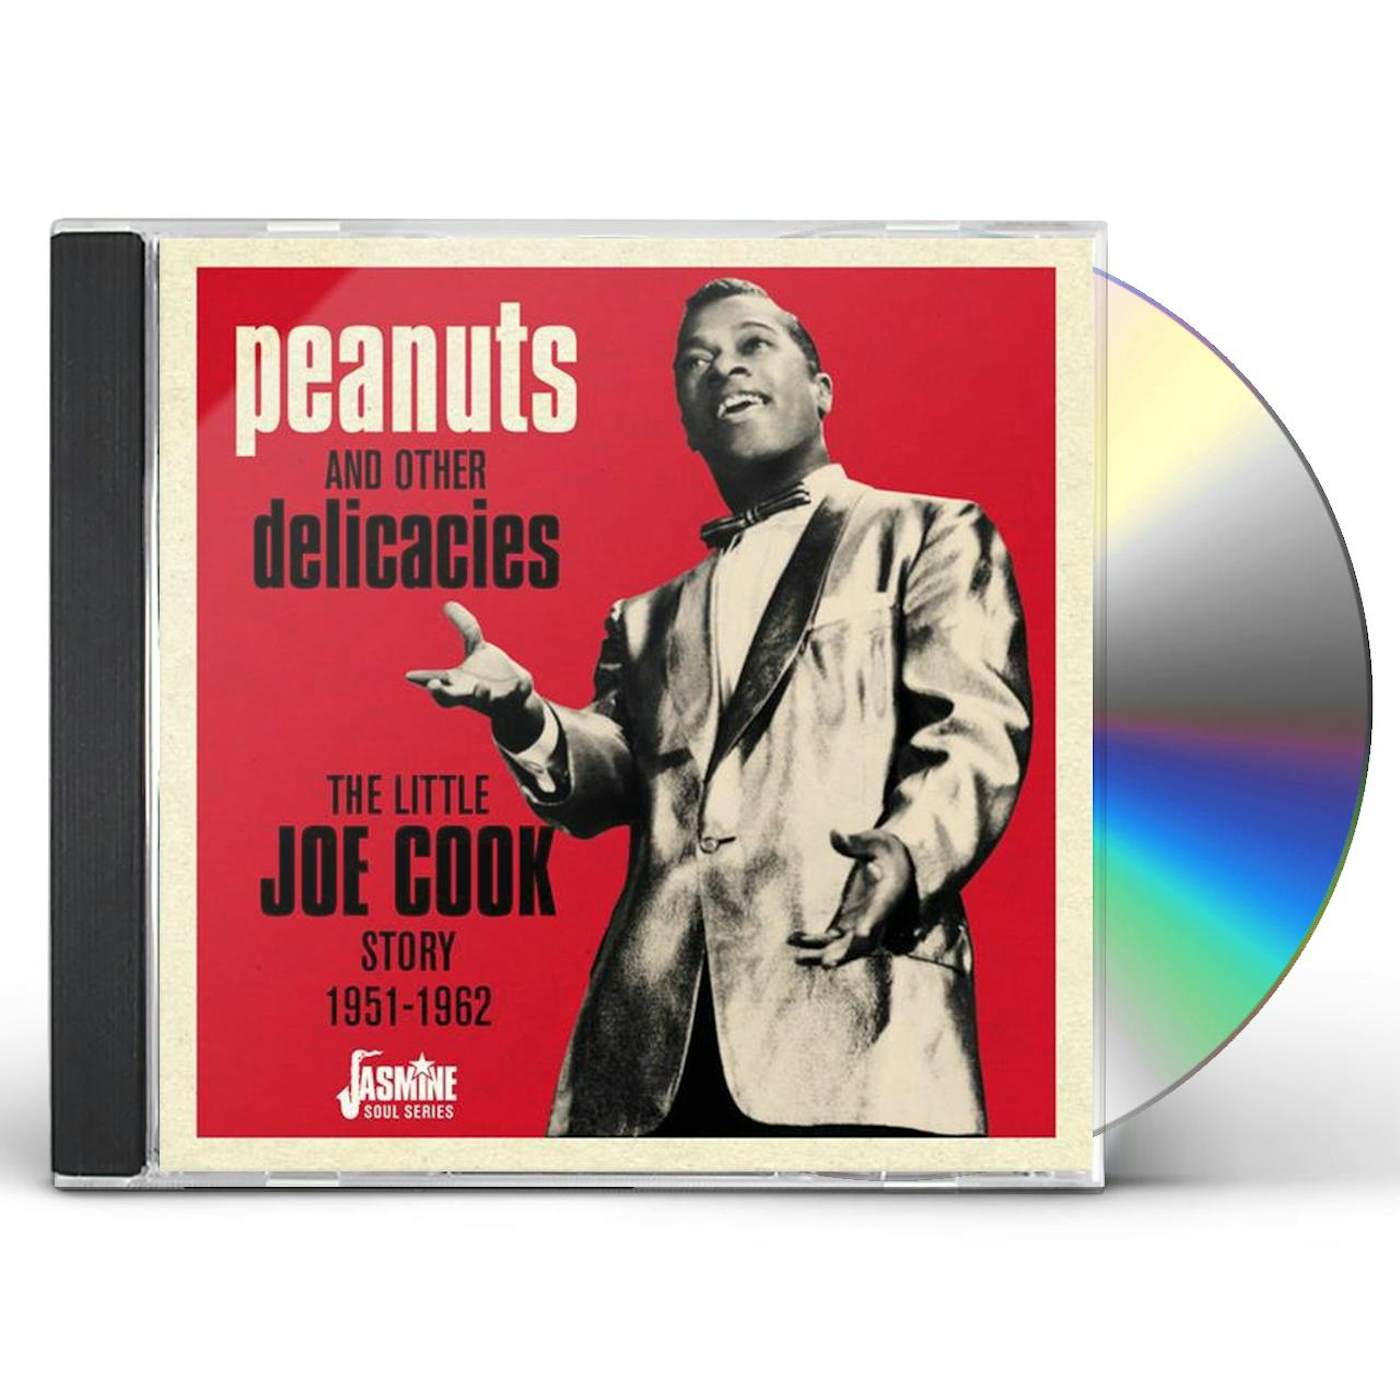 PEANUTS & OTHER DELICACIES: LITTLE JOE COOK STORY CD